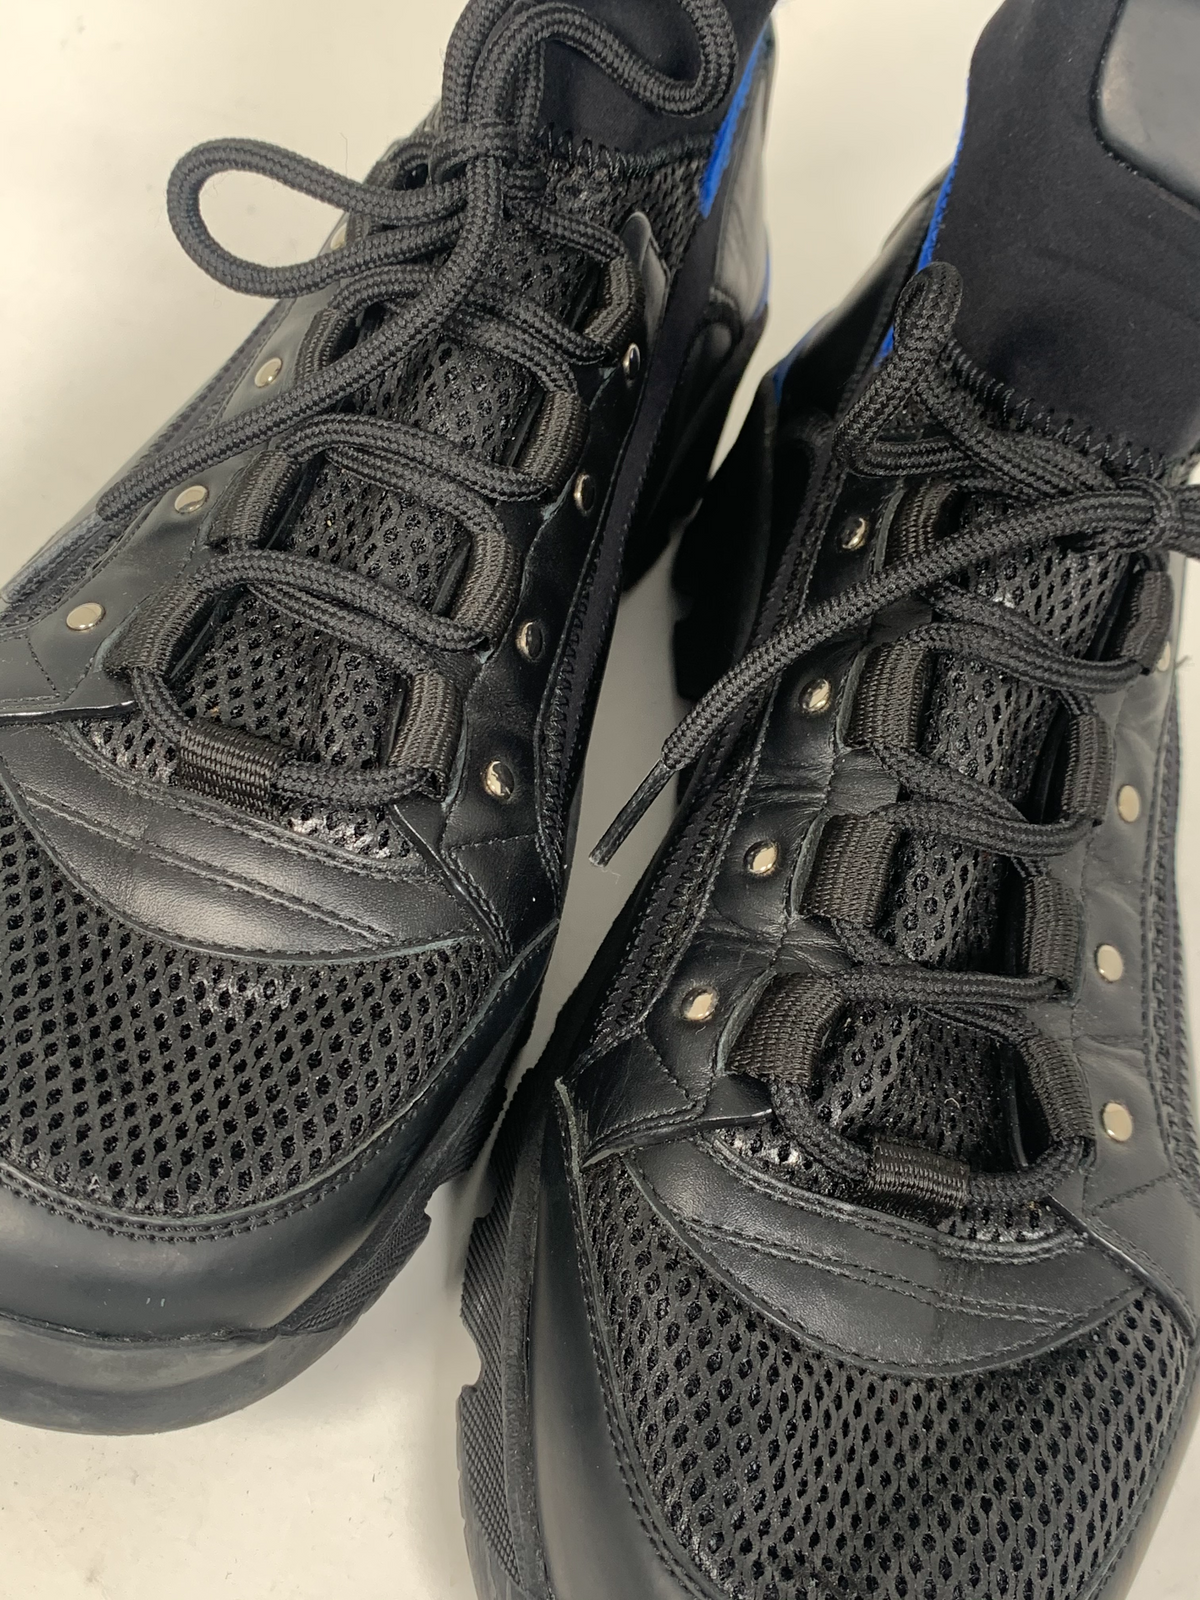 Christian Dior Black and Blue Utility Combat Boots